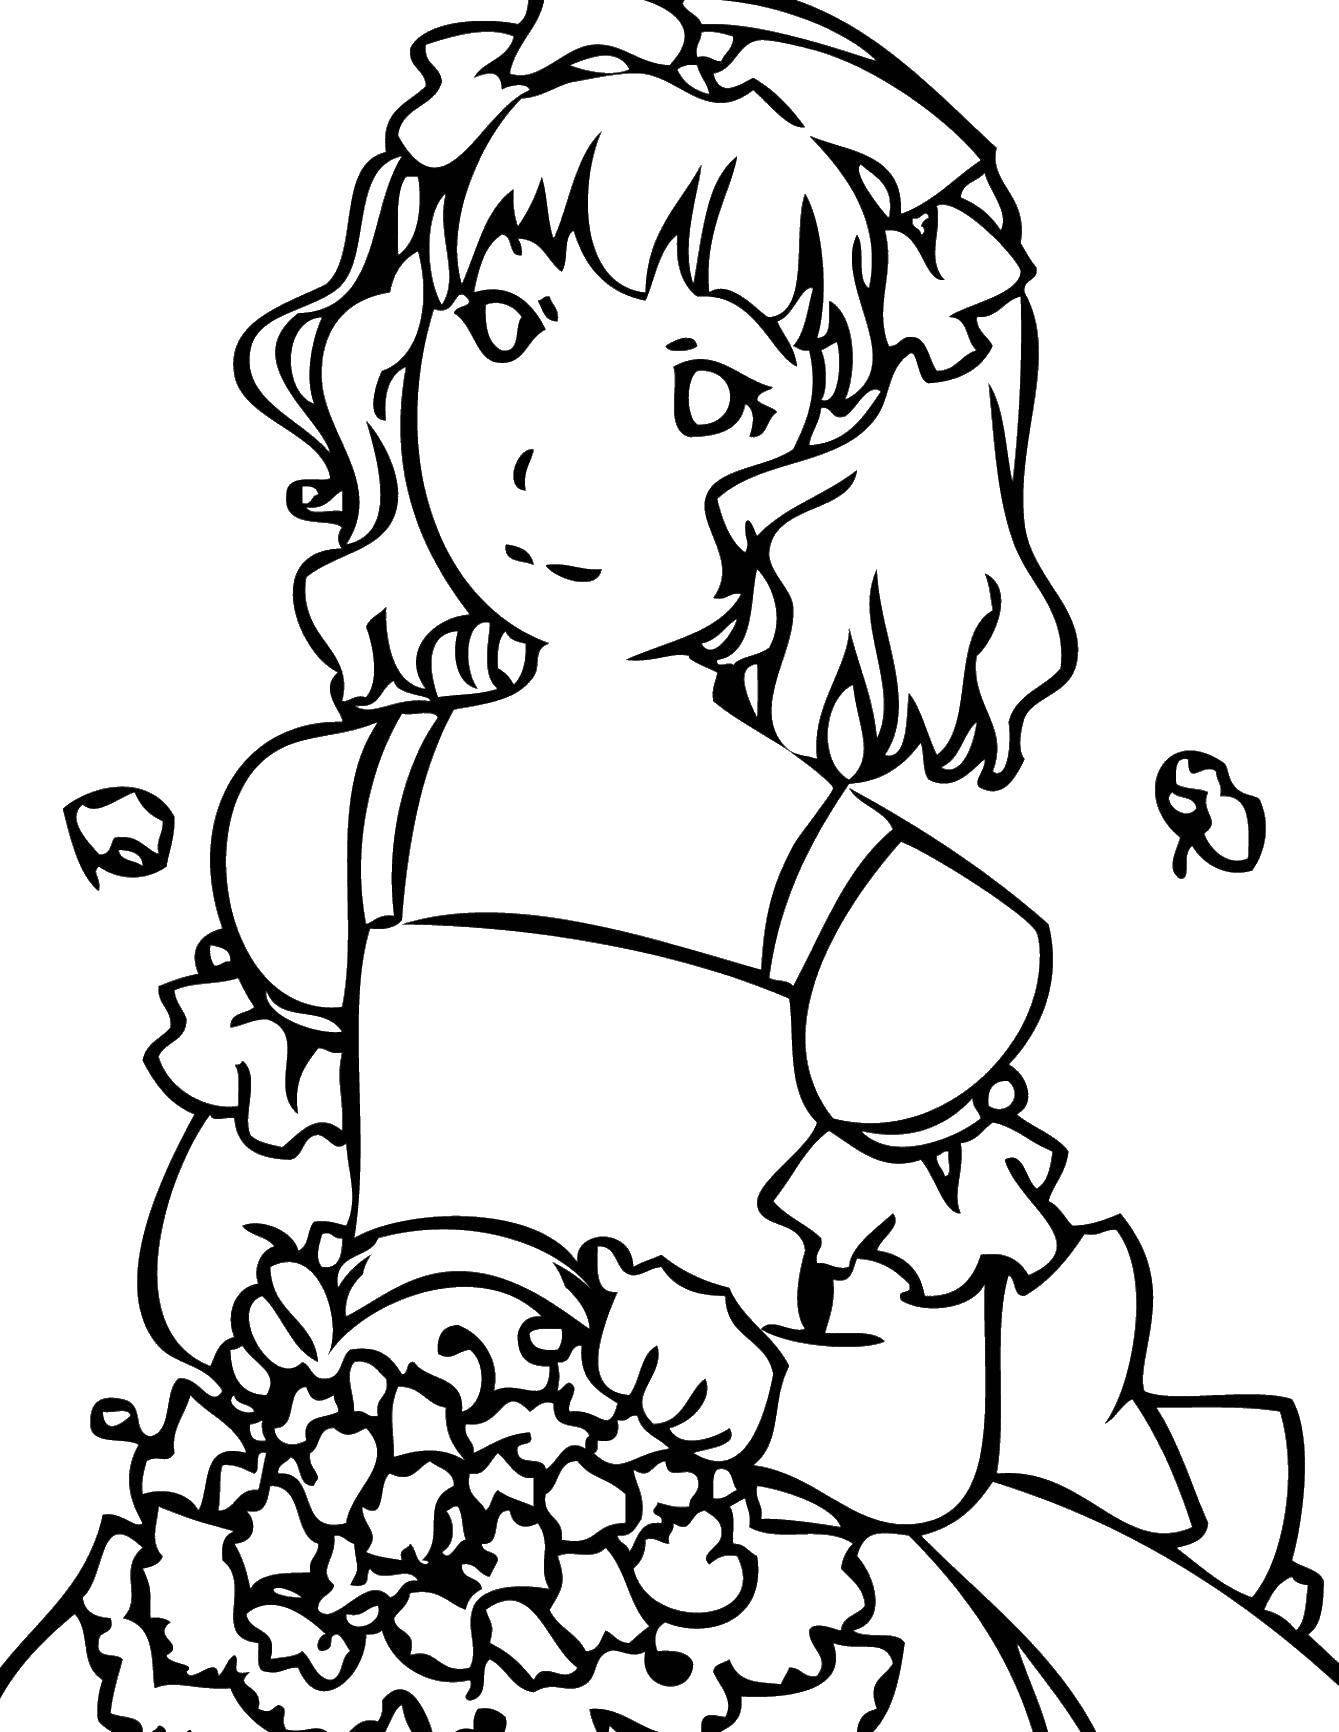 Coloring Girl with basket of flowers. Category For girls. Tags:  girl, girls, flowers.